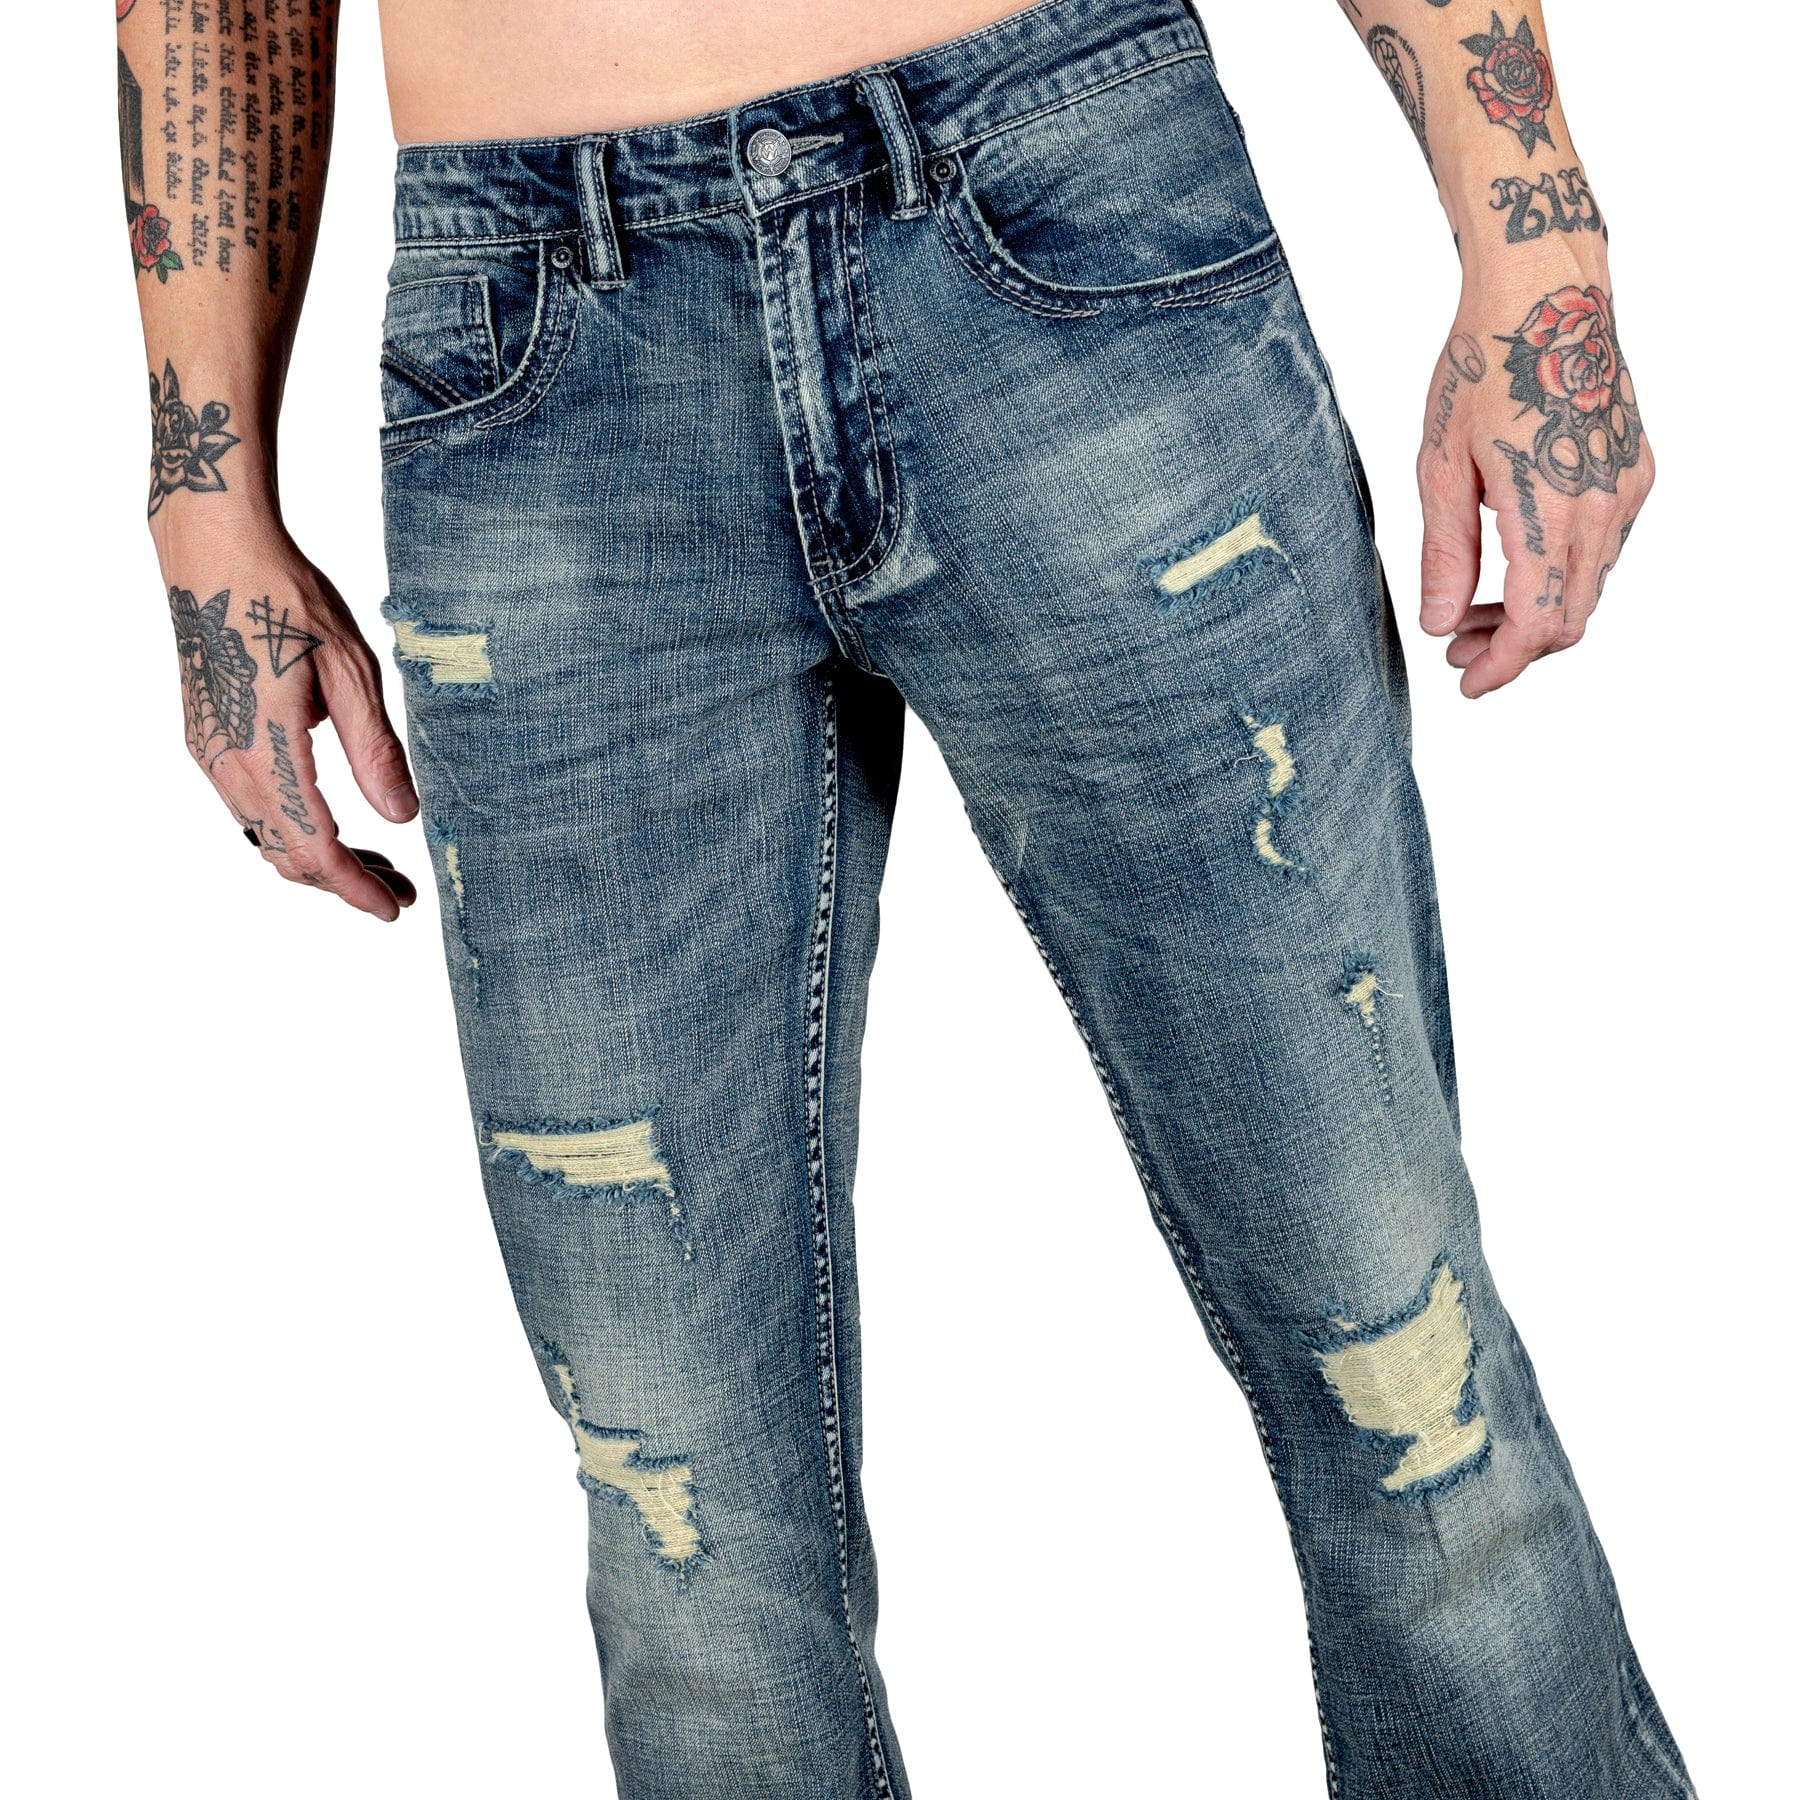 Essentials Collection Pants Trailblazer Jeans - Faded Blue